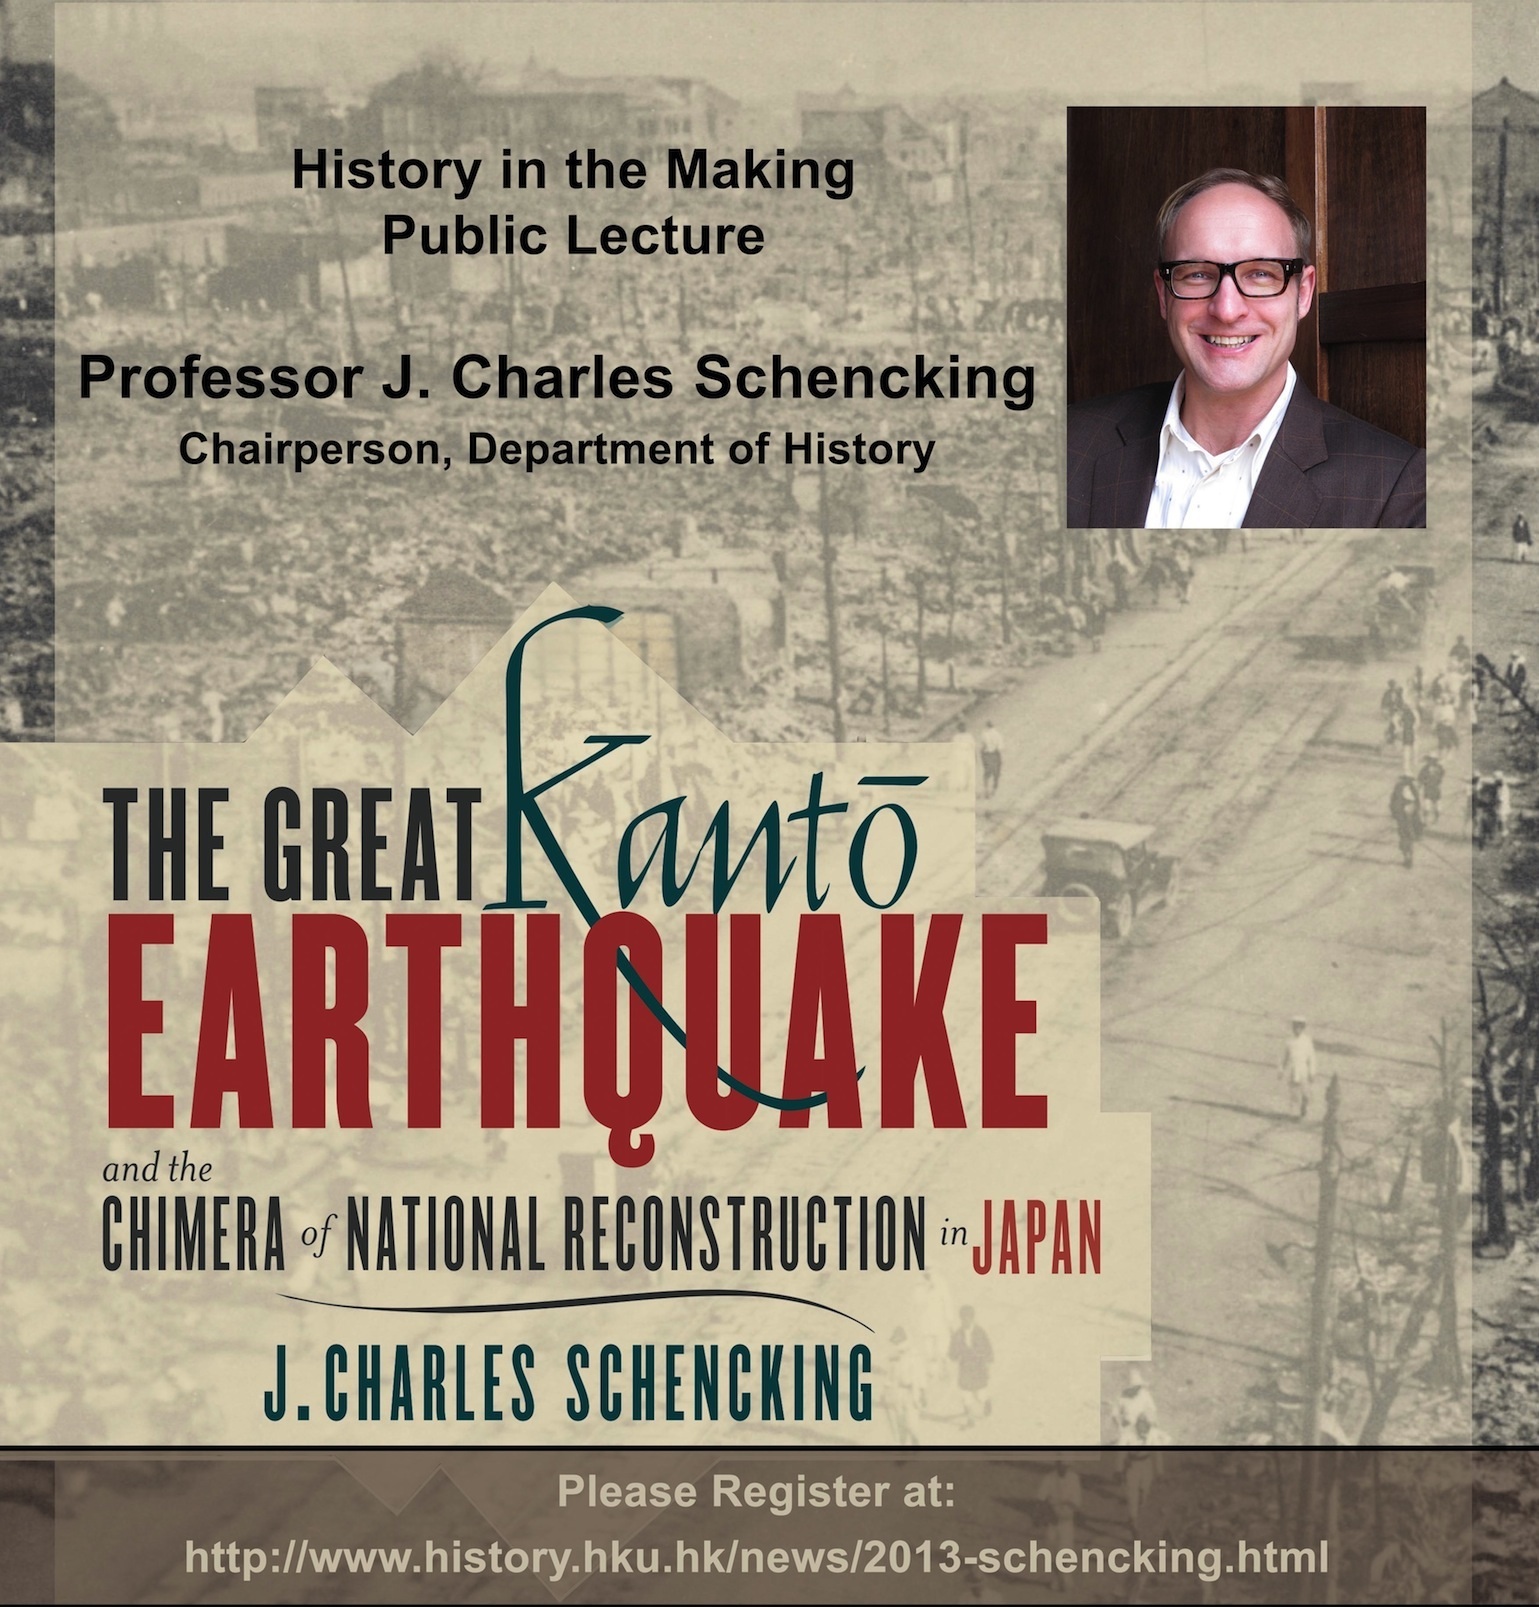 Public Lecture by Prof. Charles Schencking - The Great Kantō Earthquake and the Chimera of National Reconstruction in Japan